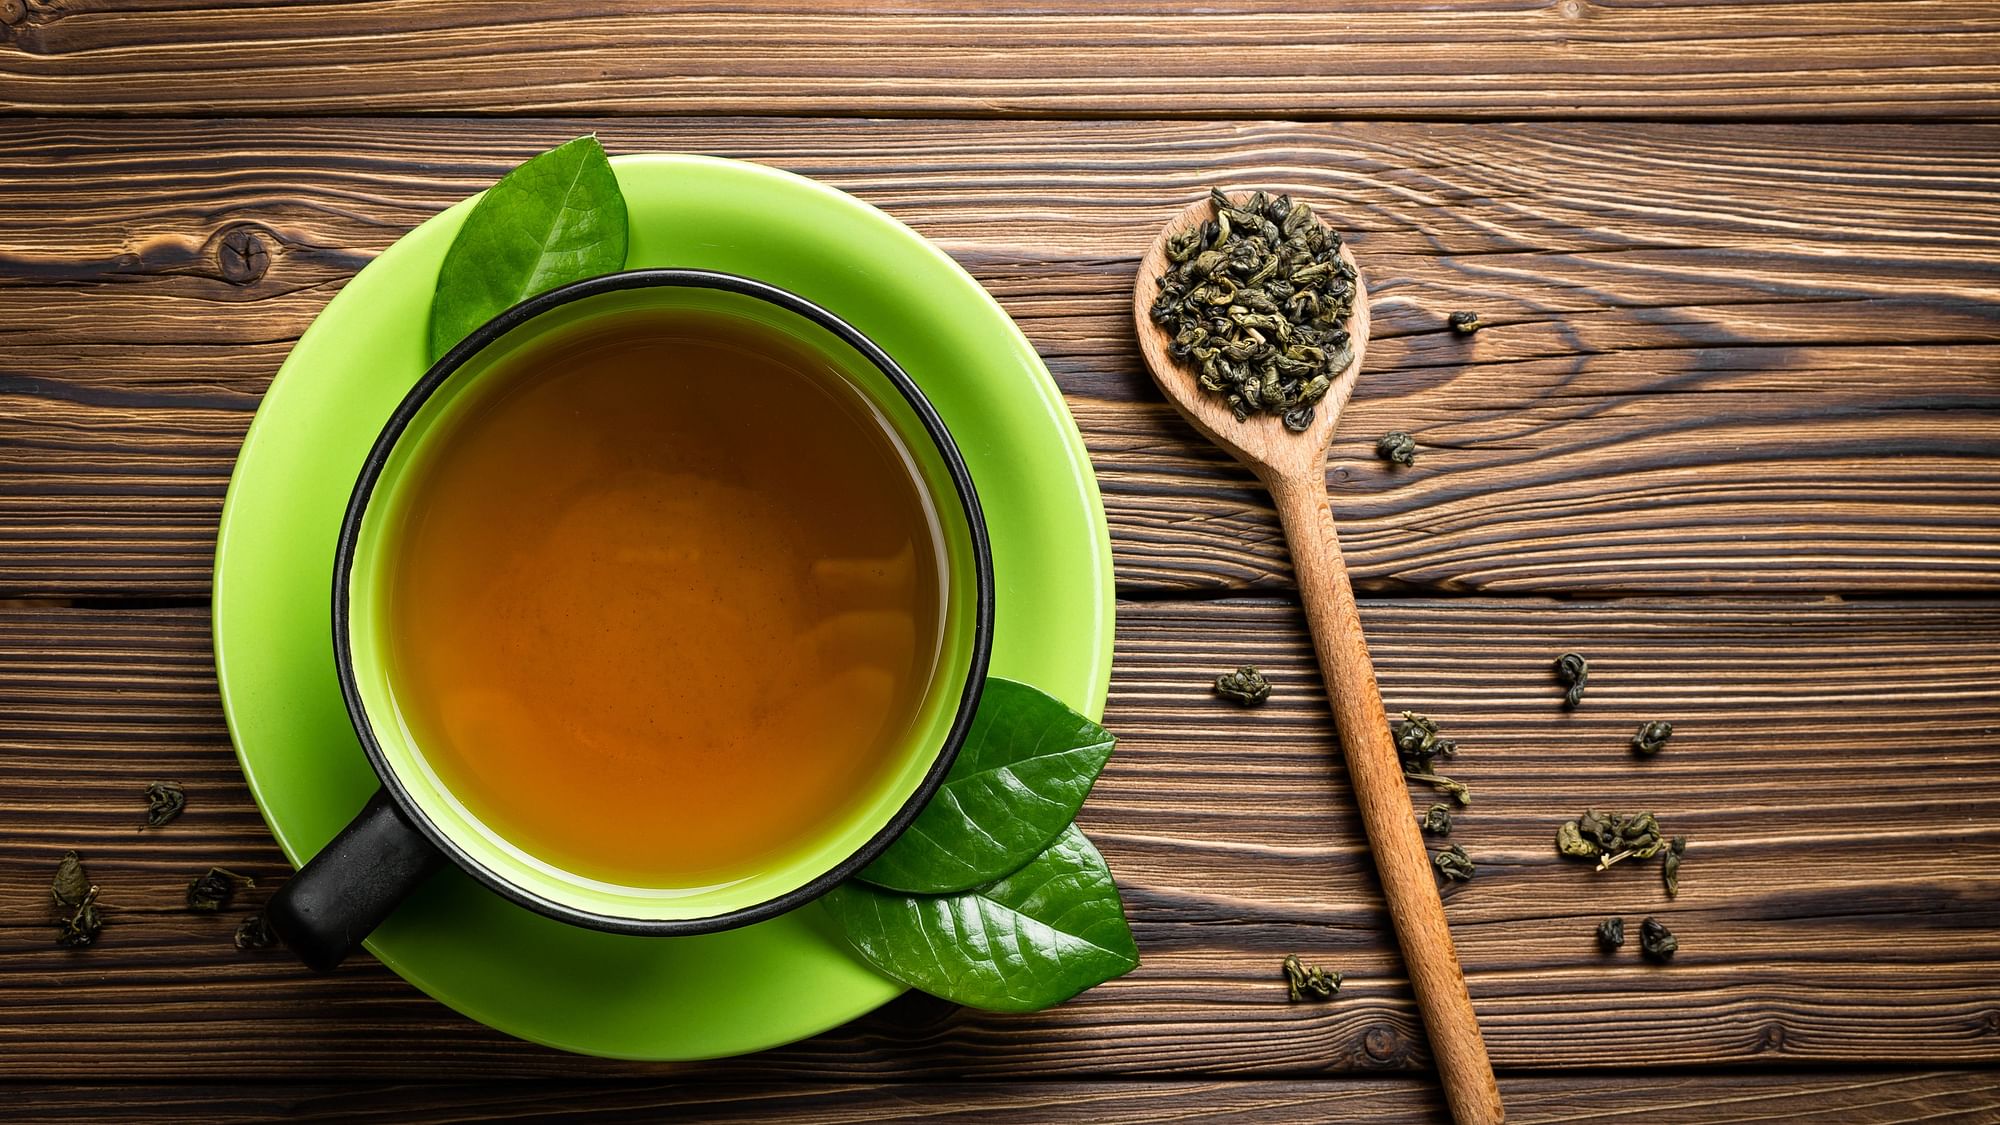 A natural antioxidant commonly found in green tea may help eliminate antibiotic-resistant bacteria or superbugs, according to a study.